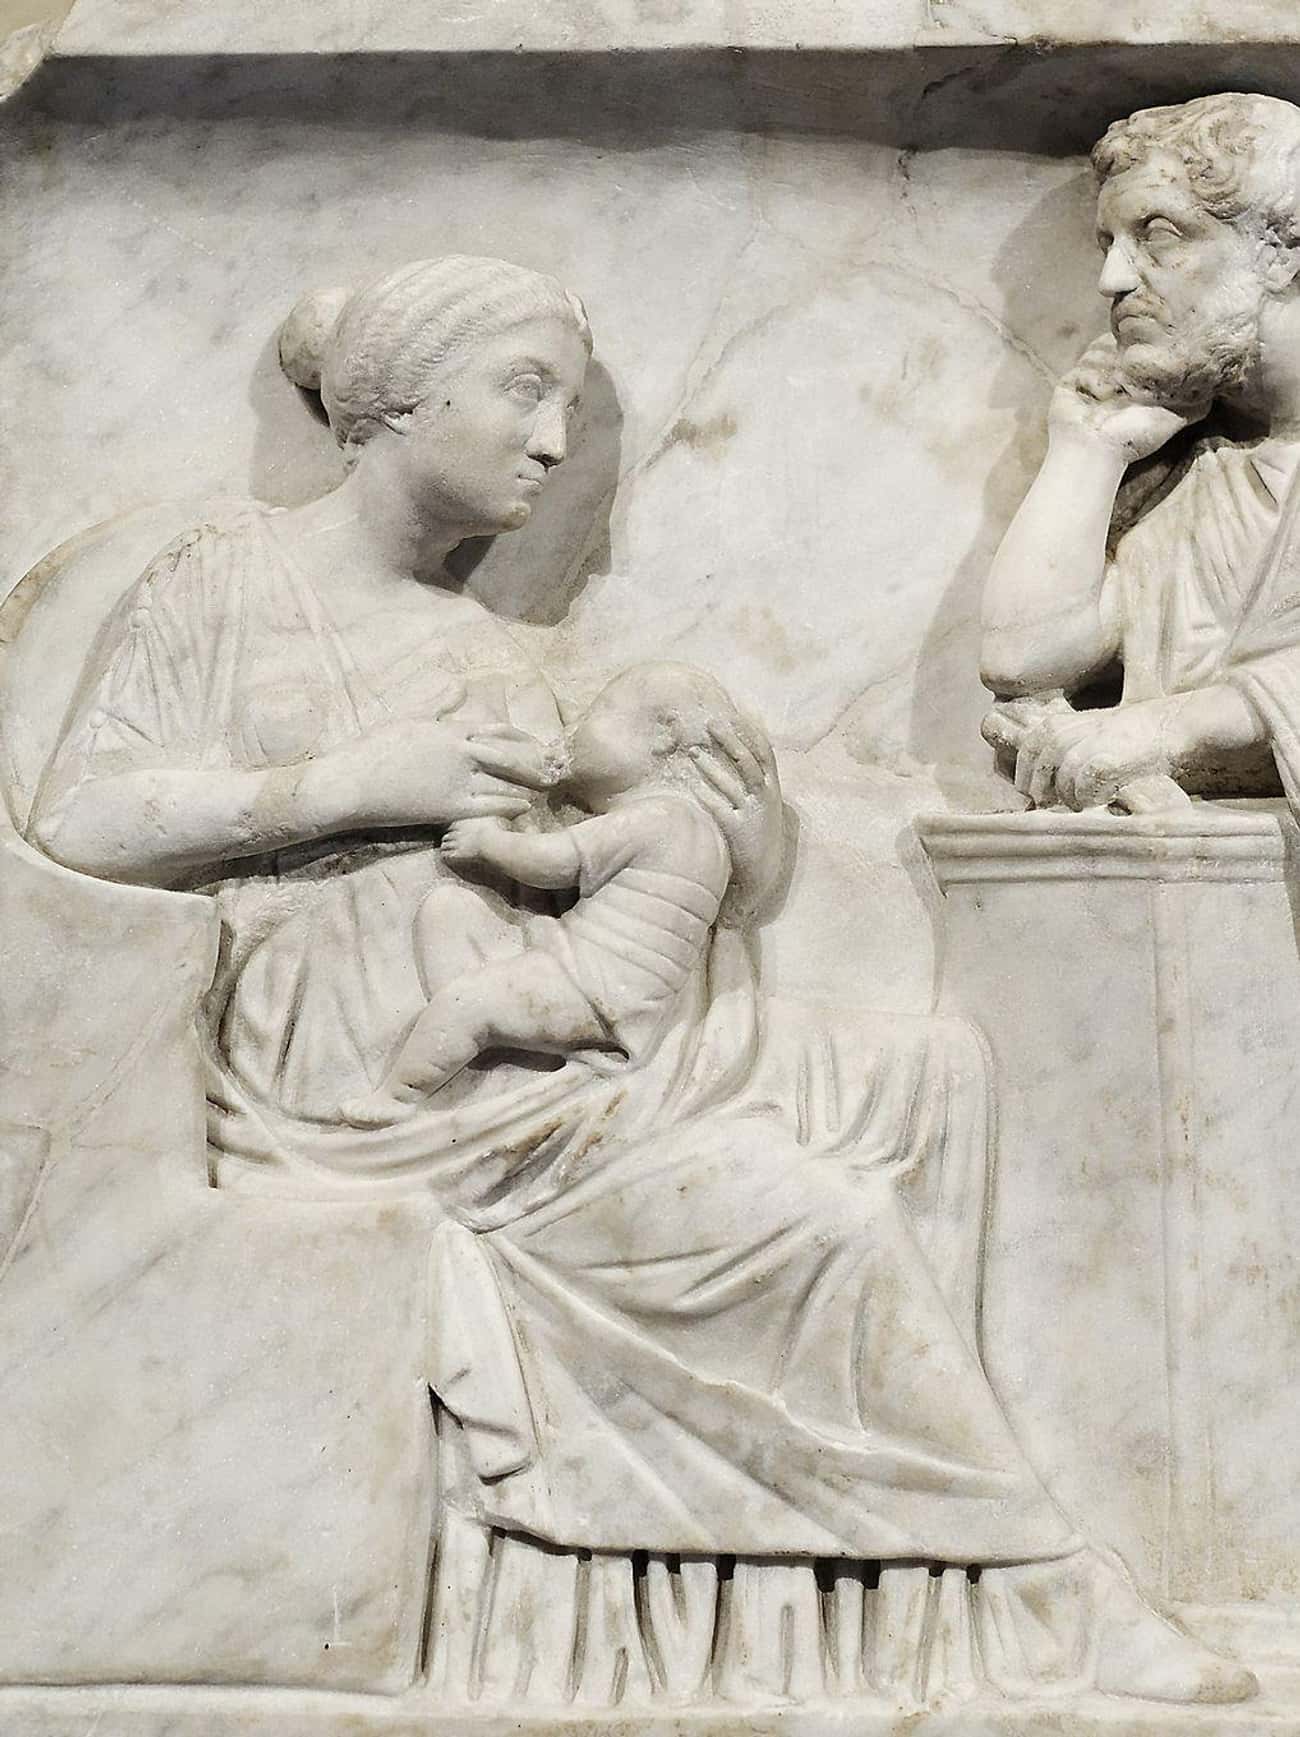 Ancient Birth Control Was Weird And Dangerous (But Sometimes Effective)